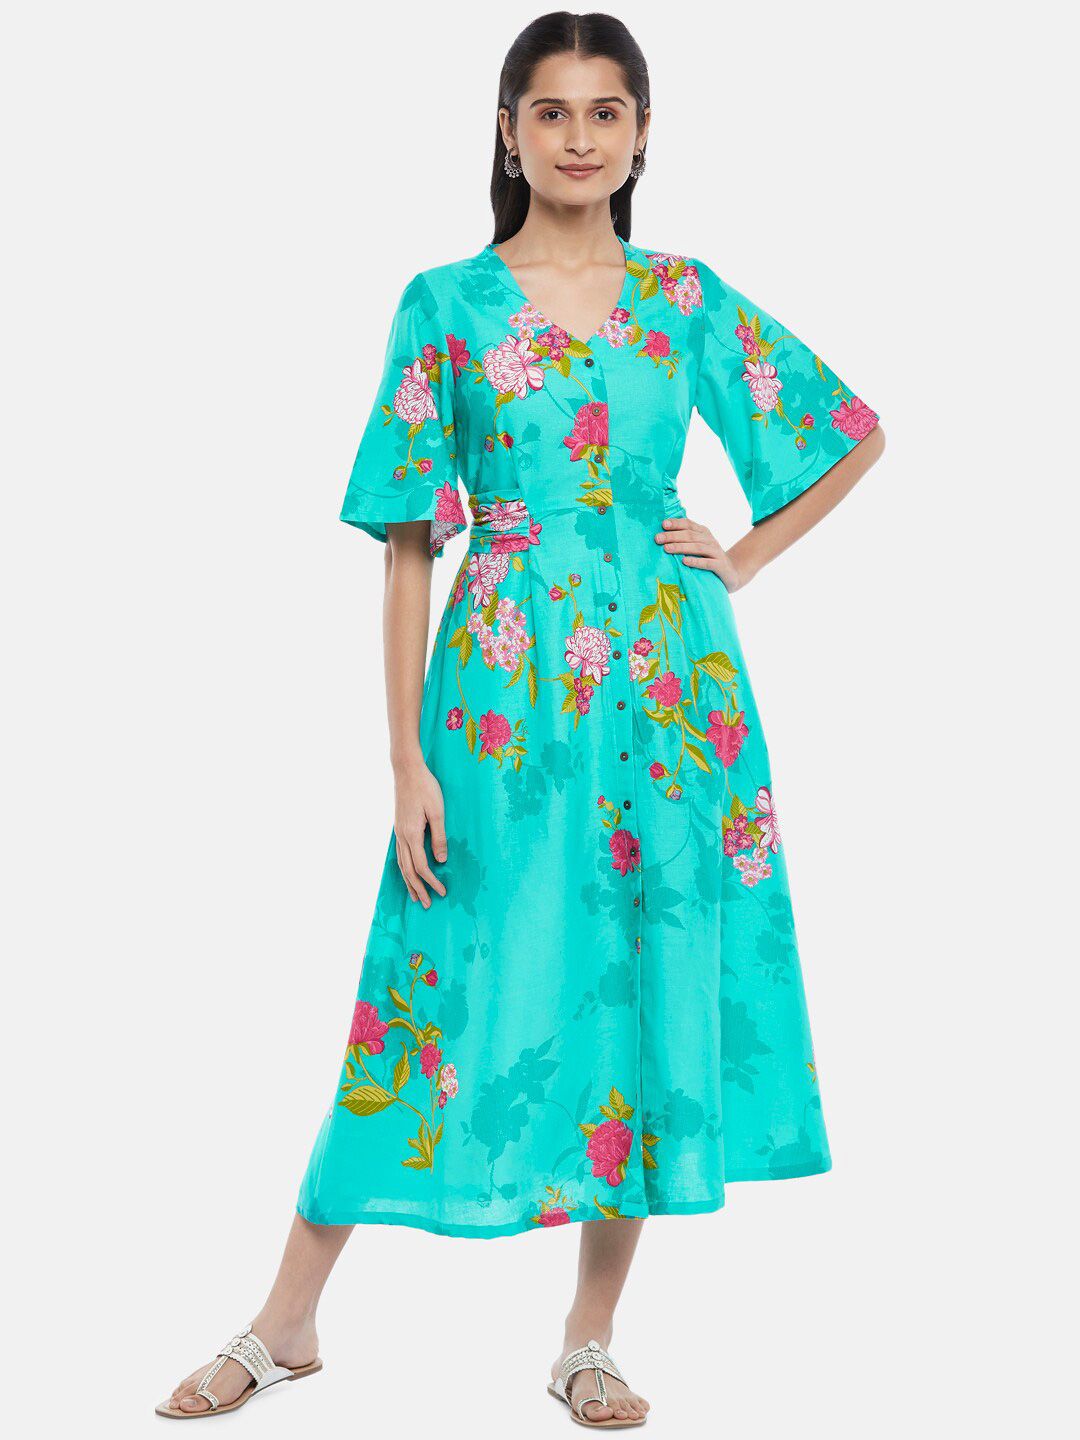 AKKRITI BY PANTALOONS Turquoise Blue & Pink Floral Pure Cotton Midi Fit & Flare Dress Price in India